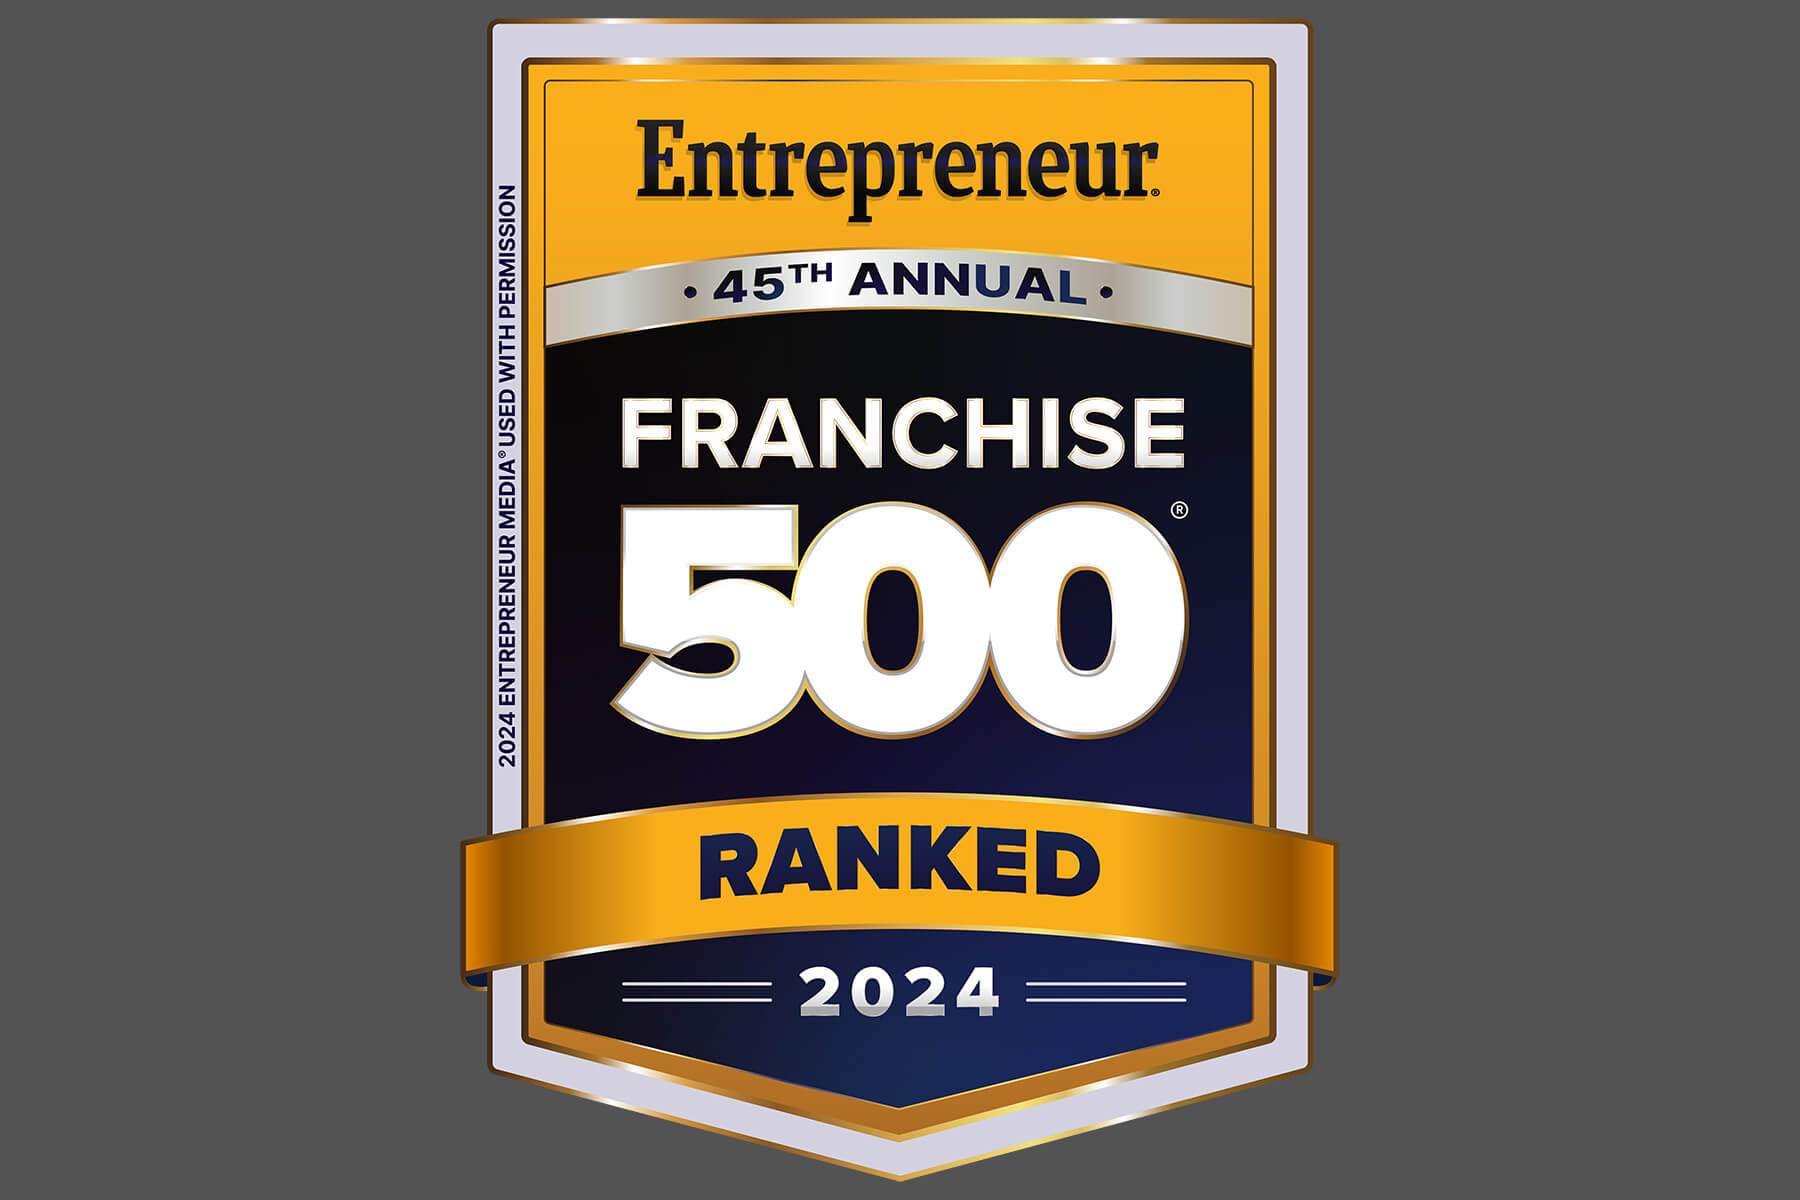 The 2024 Franchise 500® ranks Corvus Janitorial Systems as #124 for its outstanding performance.